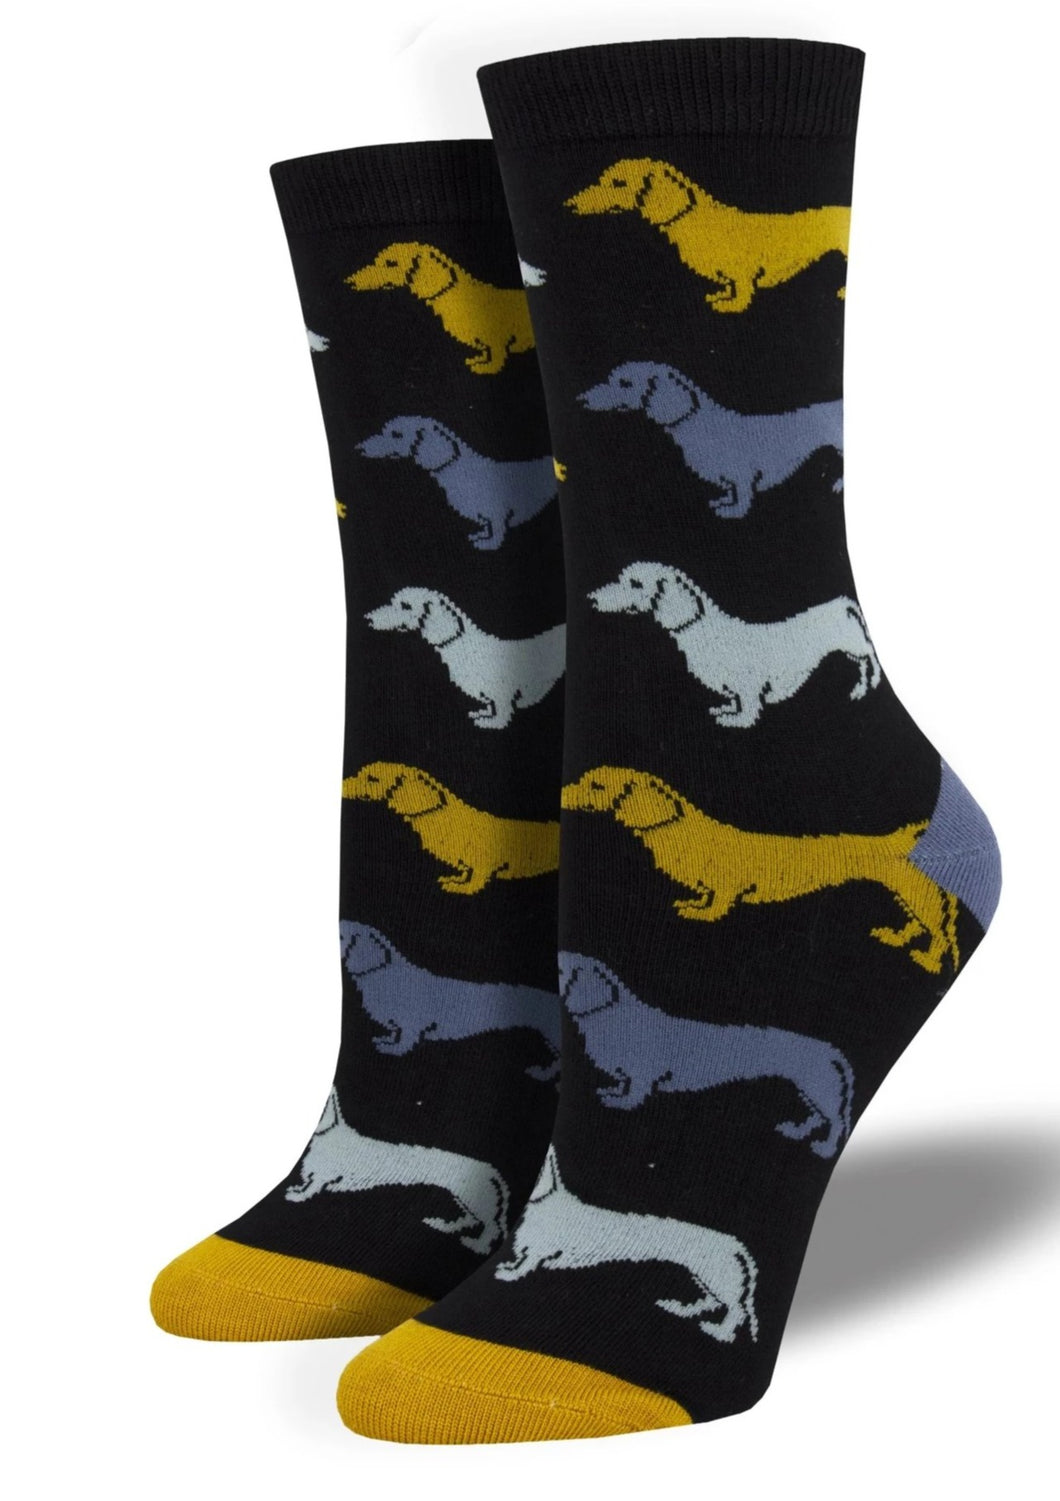 Brown with Dachshunds. Soft, Breathable, Moisture Wicking, Antibacterial, Hypoallergenic, Amazing Socks! One Size Fits Most (Men's 7-13) Fabrication: 66% Rayon from Bamboo, 32% Nylon, 2% Spandex SockSmith $22.00